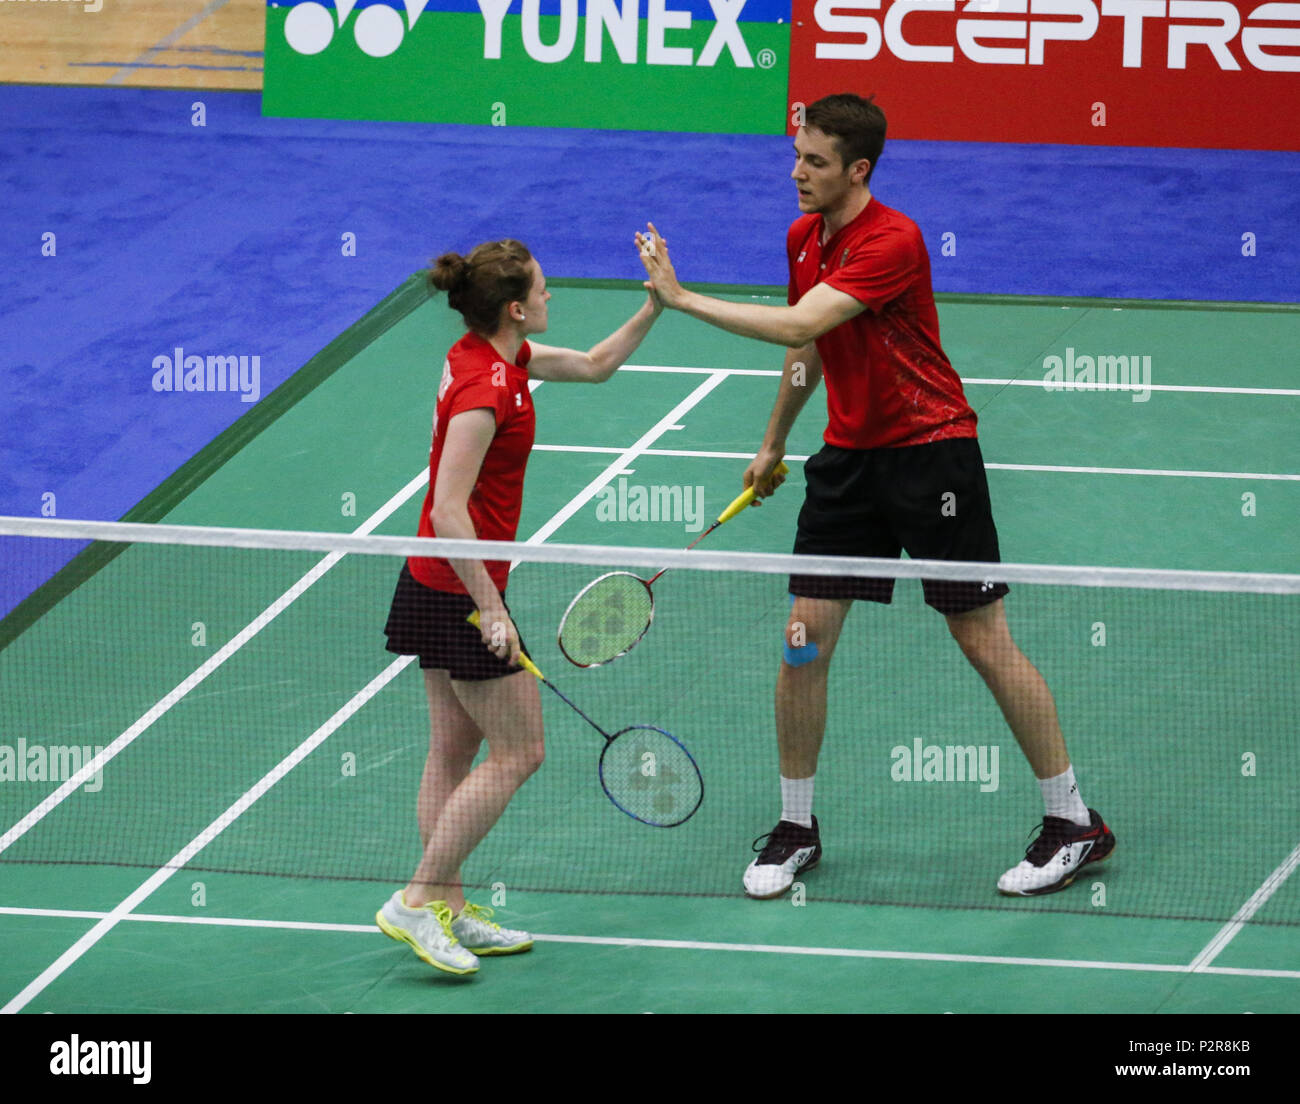 Los Angeles, California, USA. 15th June, 2018. Mark Lamsfuss and Isabel  Herttrich of Germany, compete against Lu kai and Chen Lu of China, during  the mixed doubles quarter final match at the